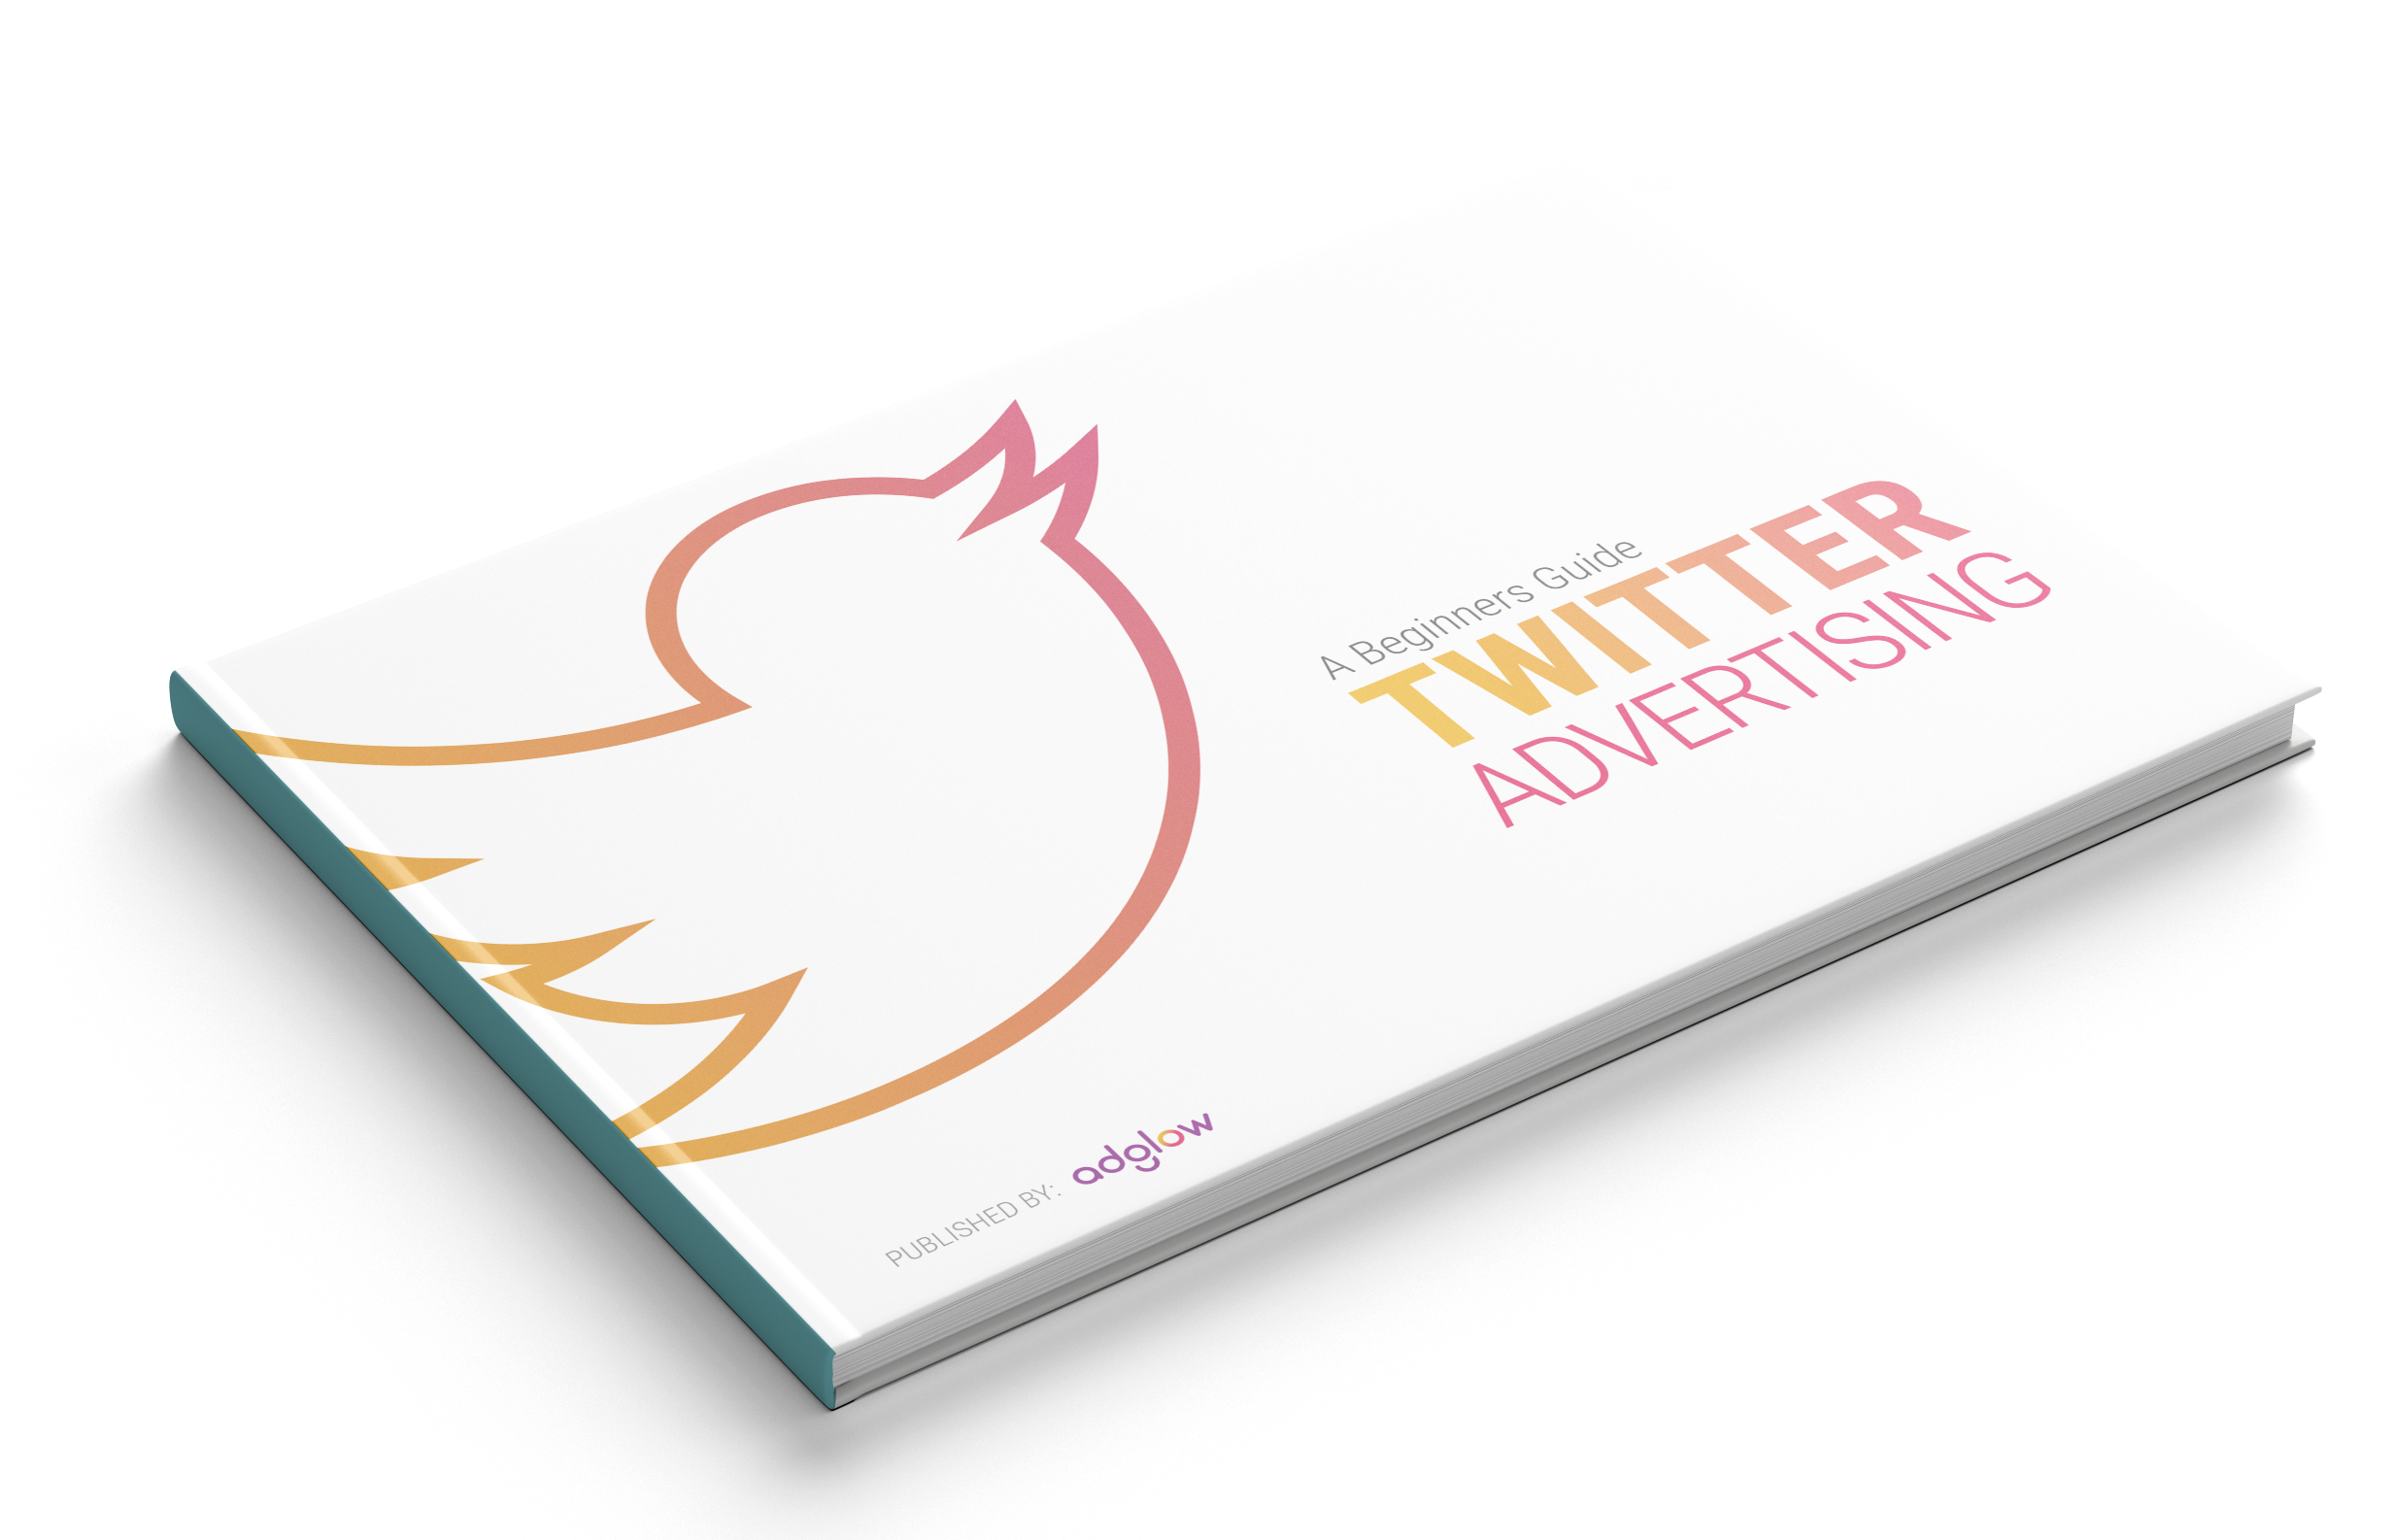 Twitter Advertising Guide Book Cover